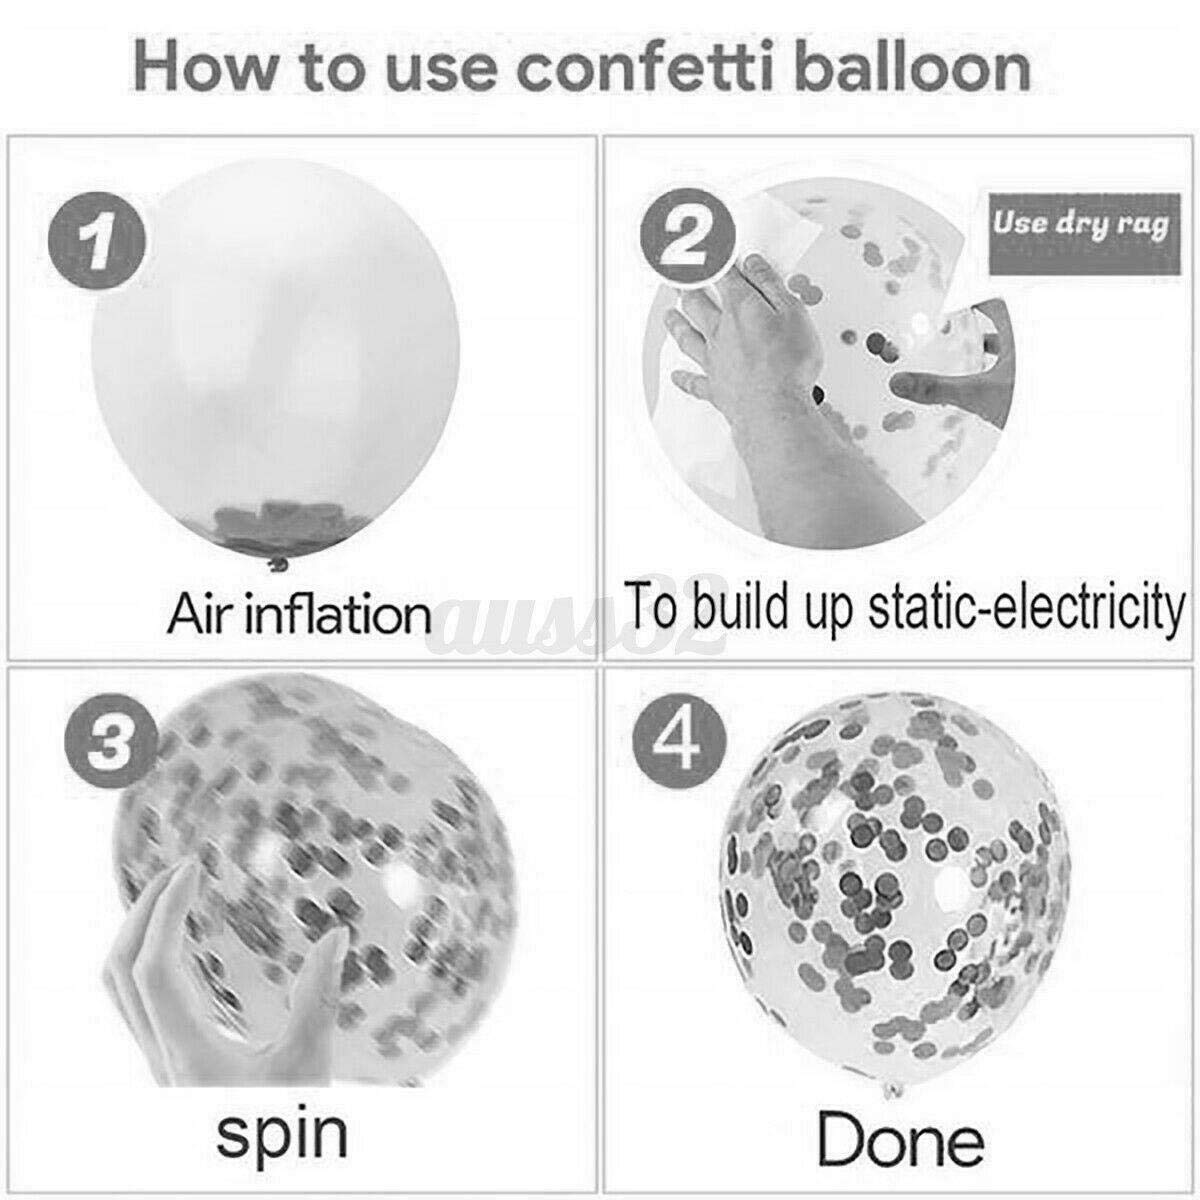 How to use confetti balloons